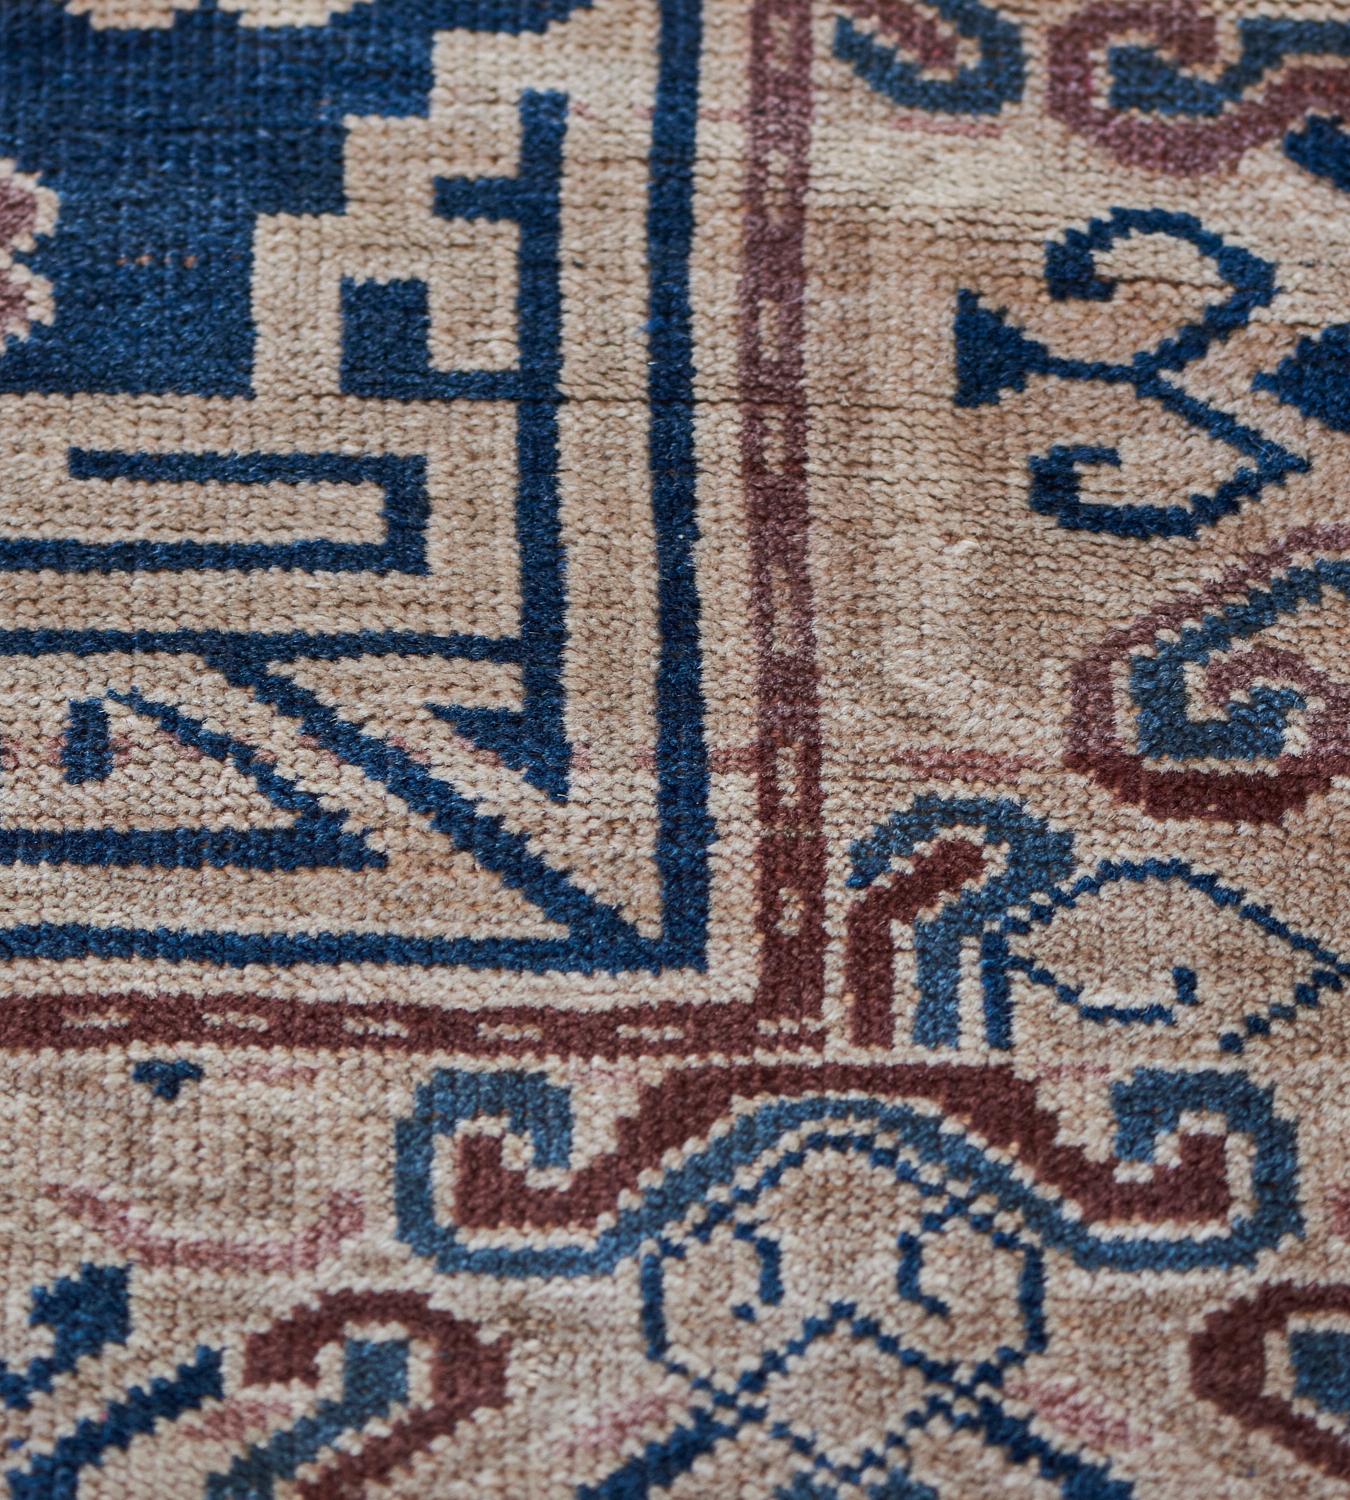 Traditional Handwoven Navy Blue Khotan Rug In Good Condition For Sale In West Hollywood, CA